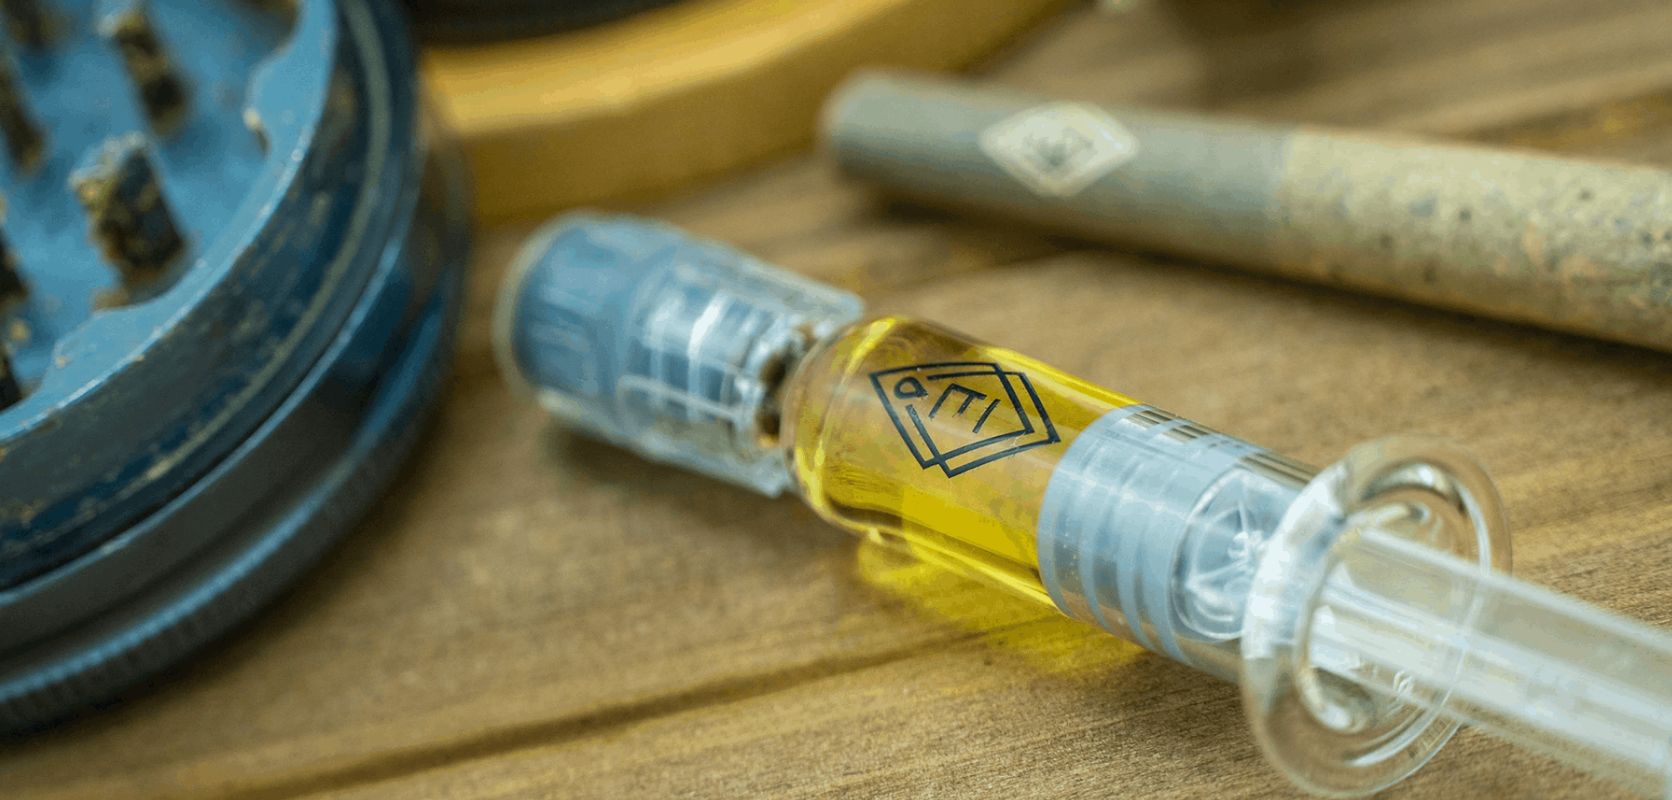 Getting THC distillate into a syringe is easy. There are a few easy-to-follow steps that you can take to make the process as smooth and quick as possible.